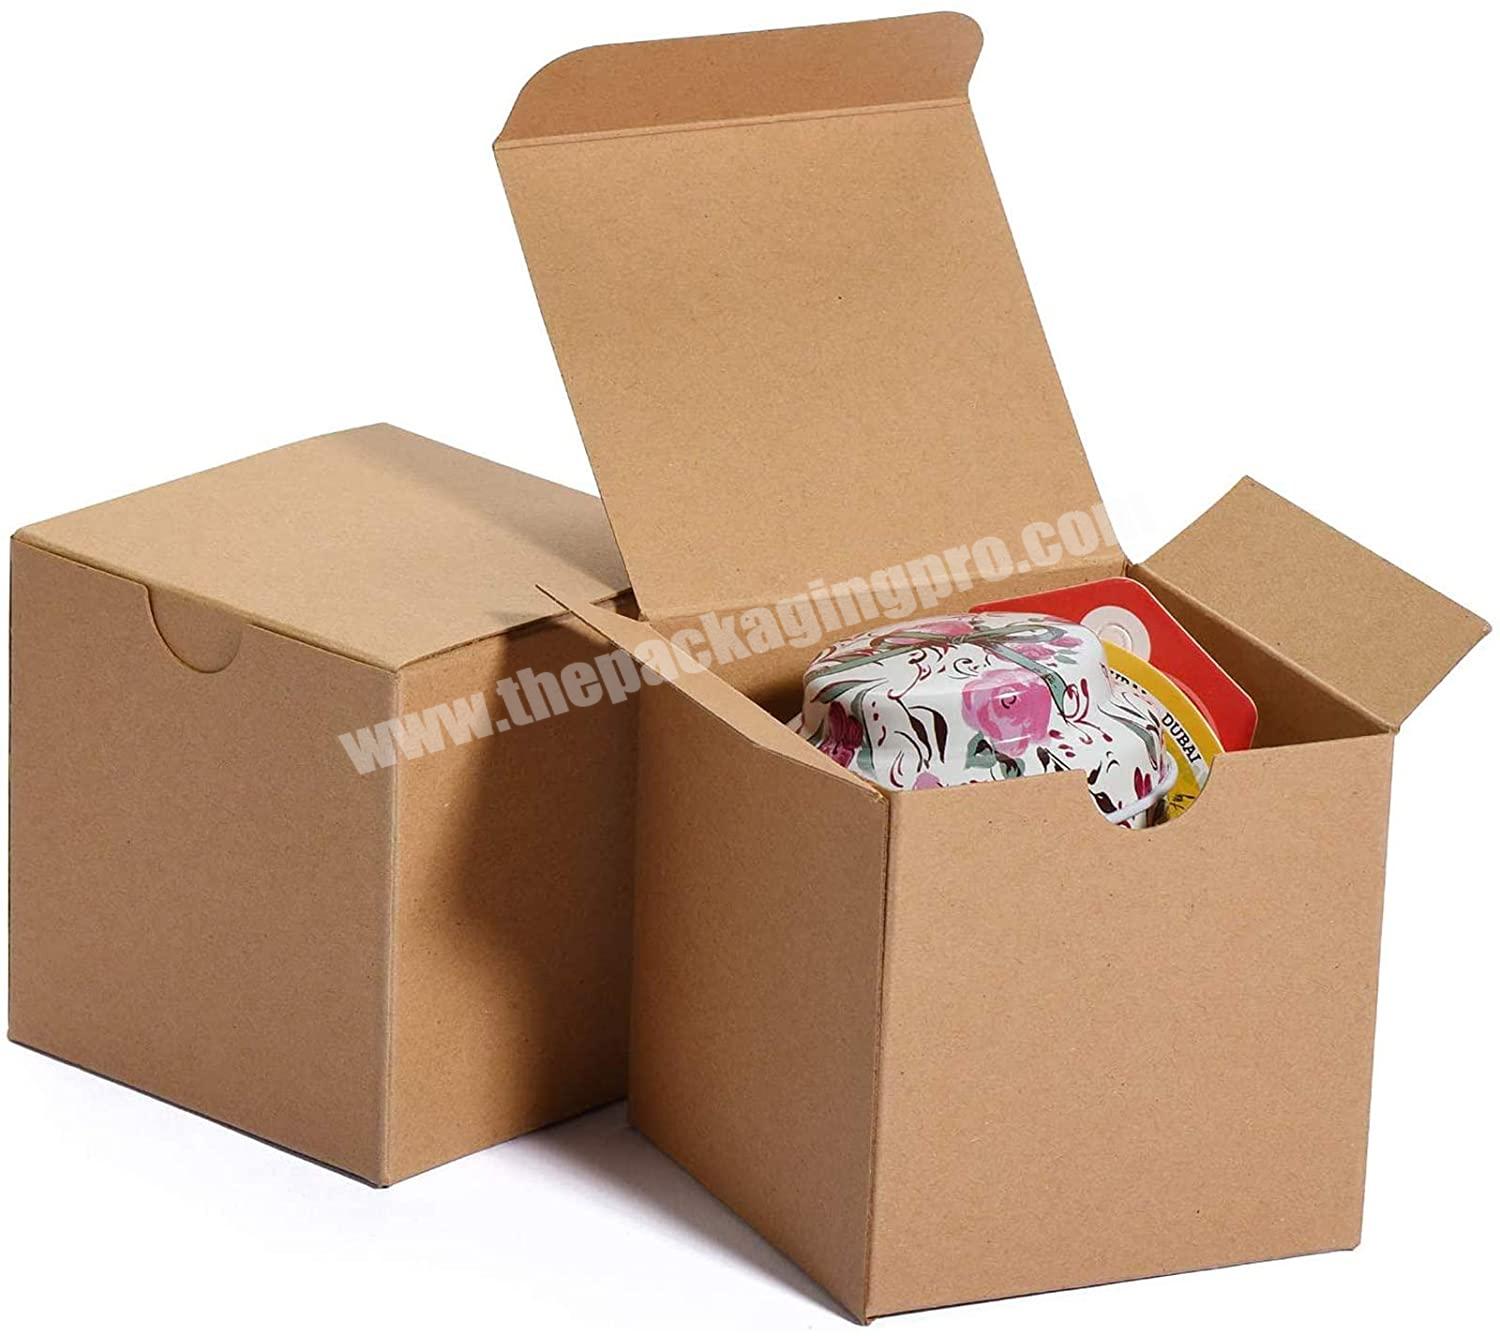 8X8X4in Favor for Bridesmaid ProposalBirthdayPartyWedding, Kraft Paper Present Packaging Box with Lids